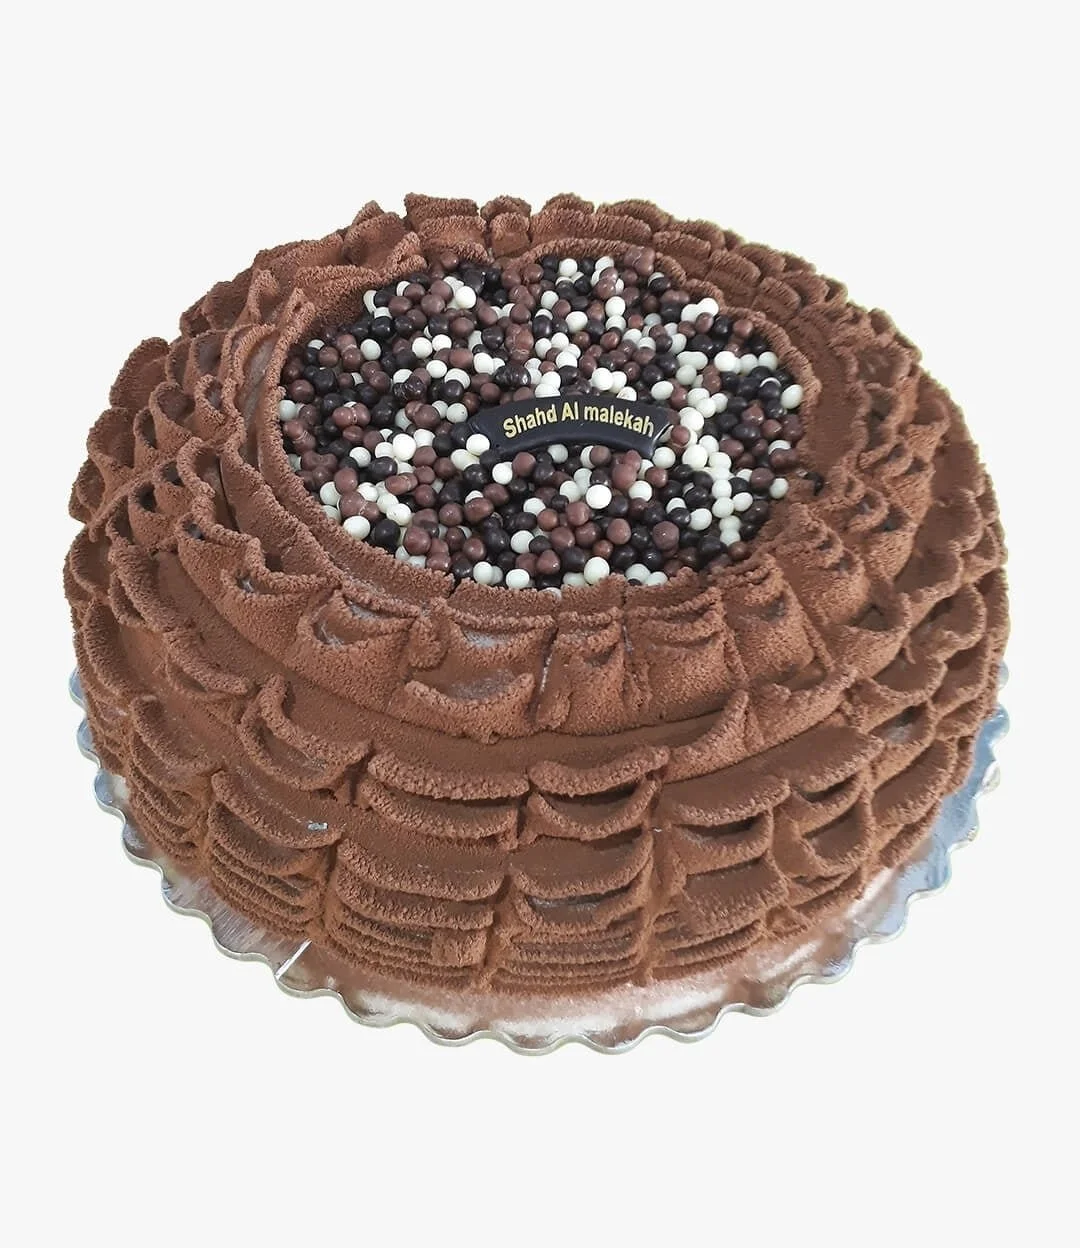 Chocolate Cake with Chocolate Grains Topping 